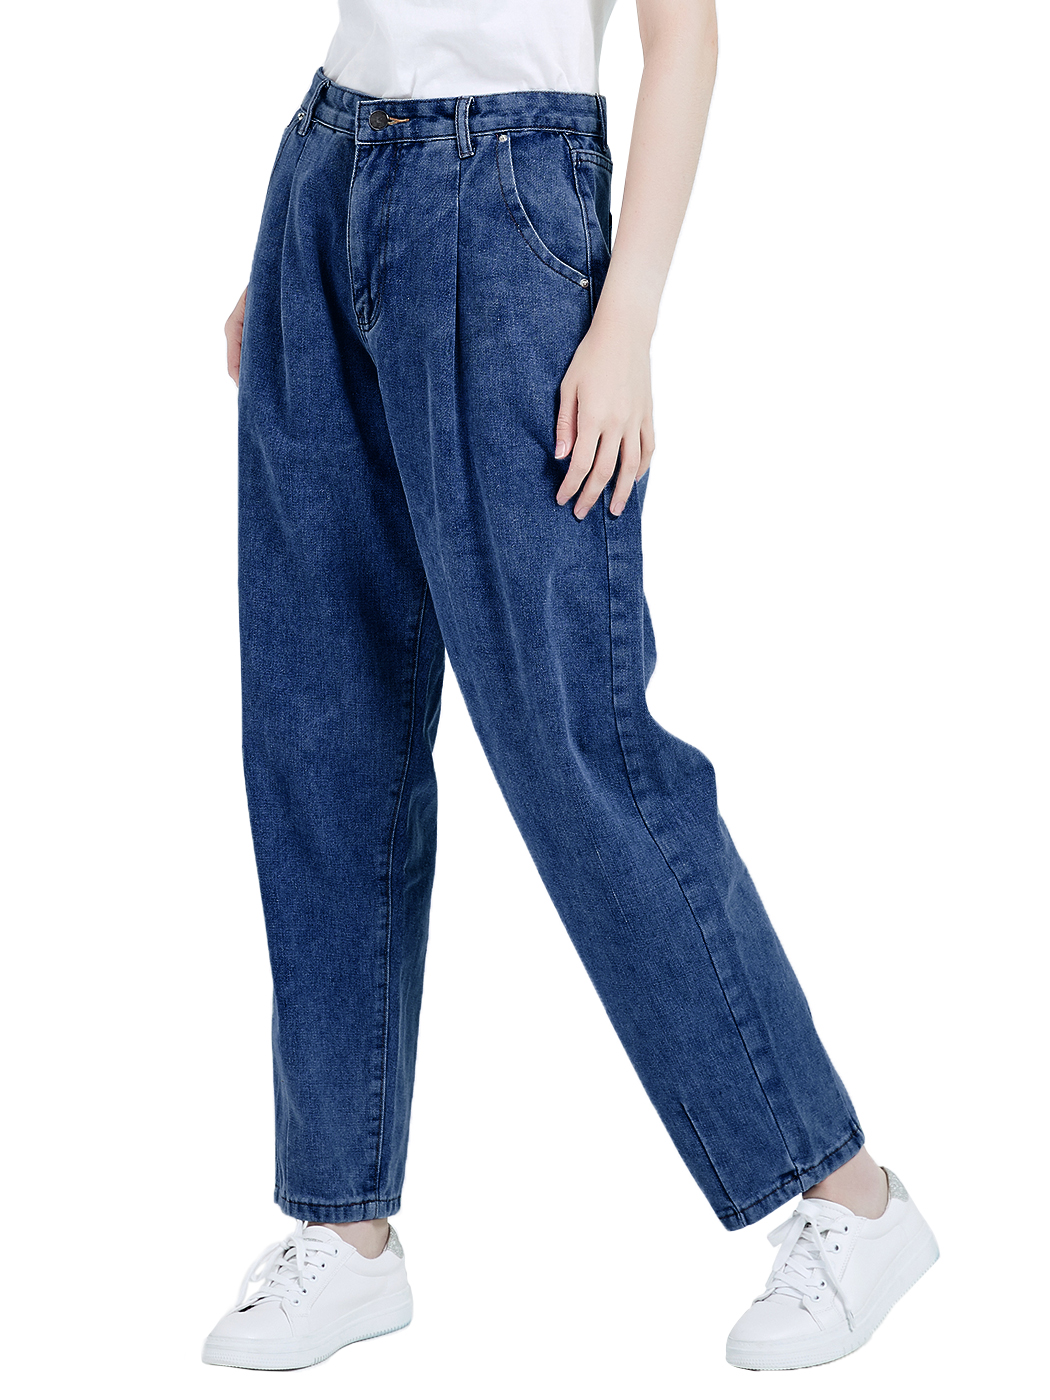 Women's Classic High Waisted Boyfriend Cropped Denim Jeans Loose Harem Pants - image 4 of 7